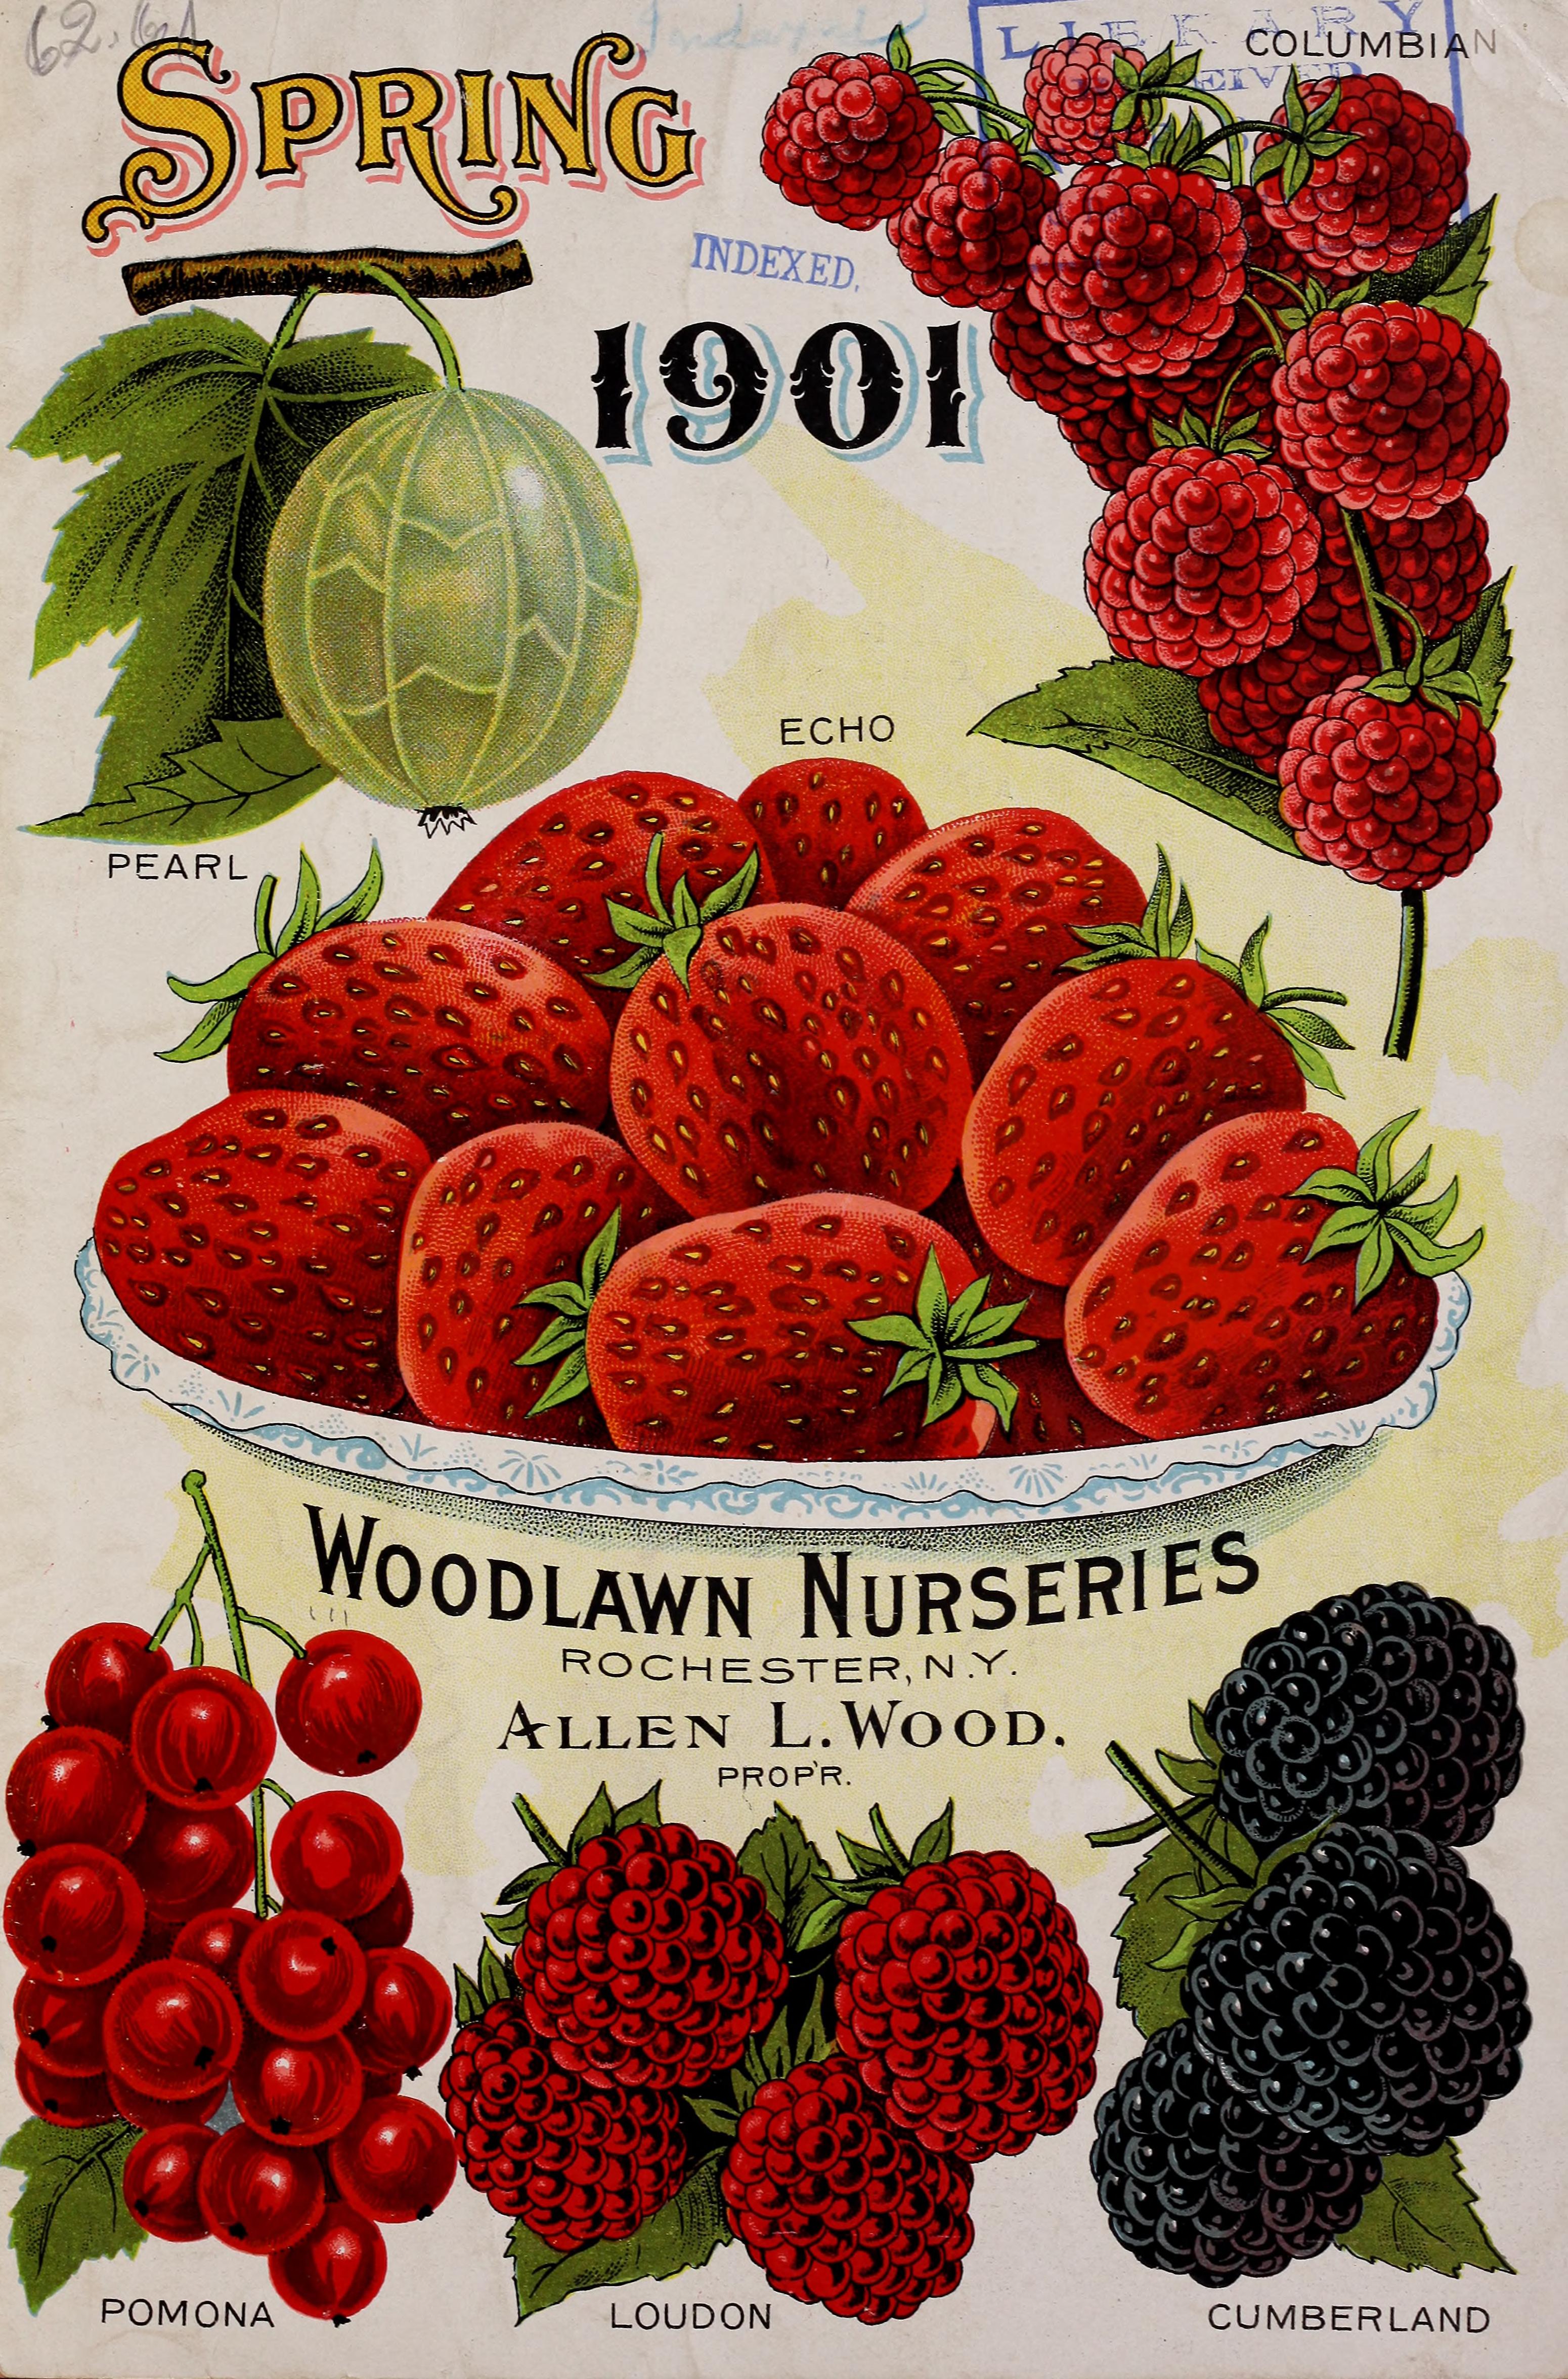 Woodlawn Nurseries Spring 1901 Catalog, front cover